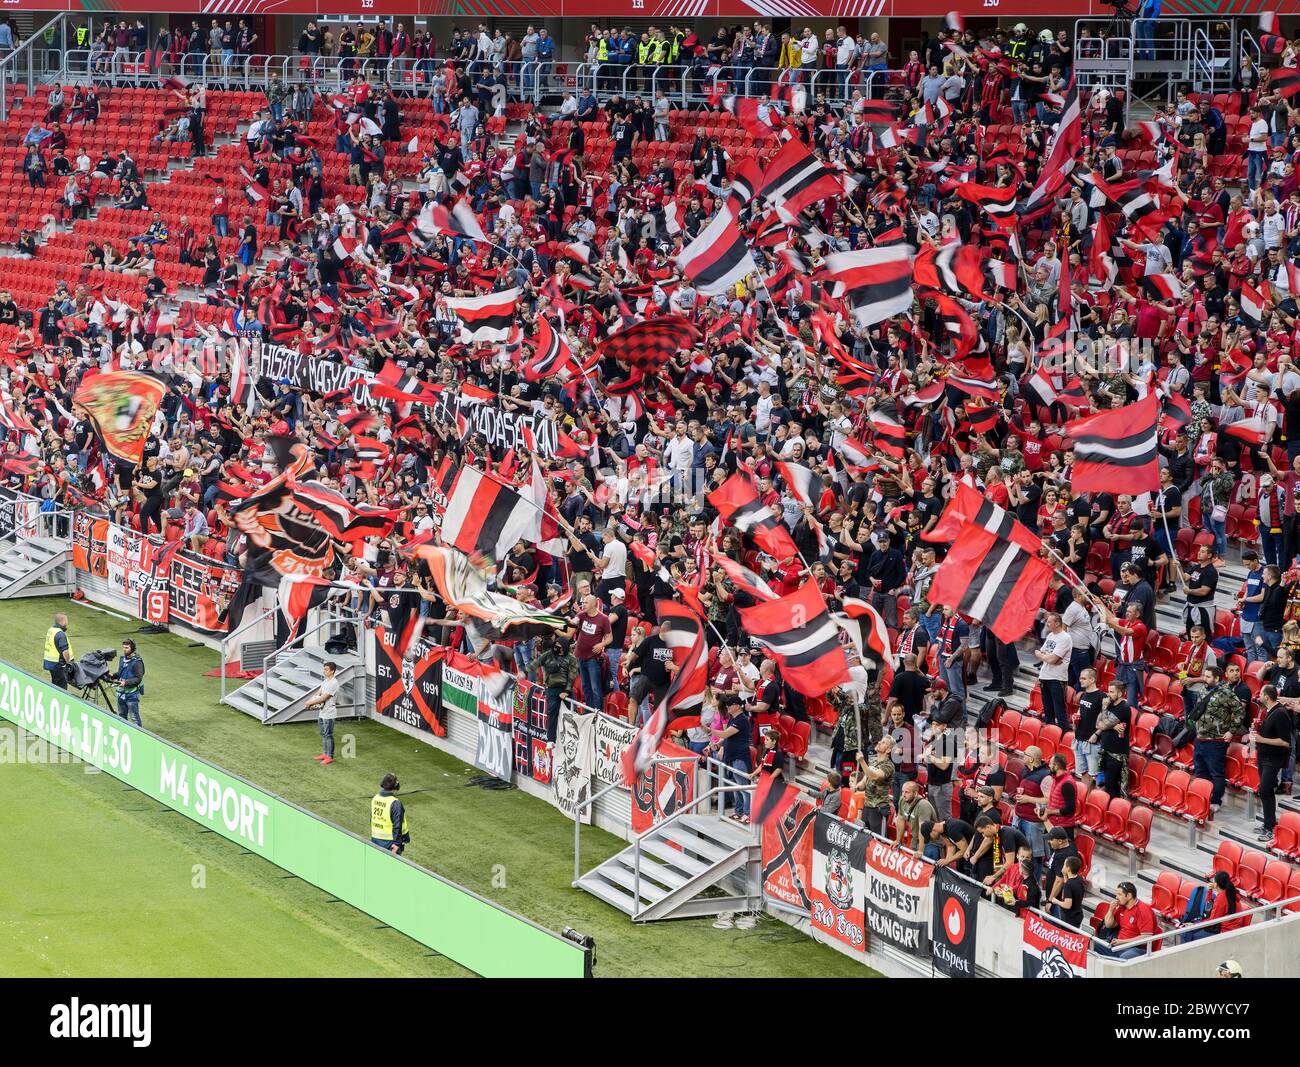 BUDAPEST, HUNGARY - JUNE 3: Ultras of Budapest Honved (as known as Puskas Army) flutter flags during the Hungarian Cup Final match between Budapest Honved and Mezokovesd Zsory FC at Puskas Arena on June 3, 2020 in Budapest, Hungary. Stock Photo